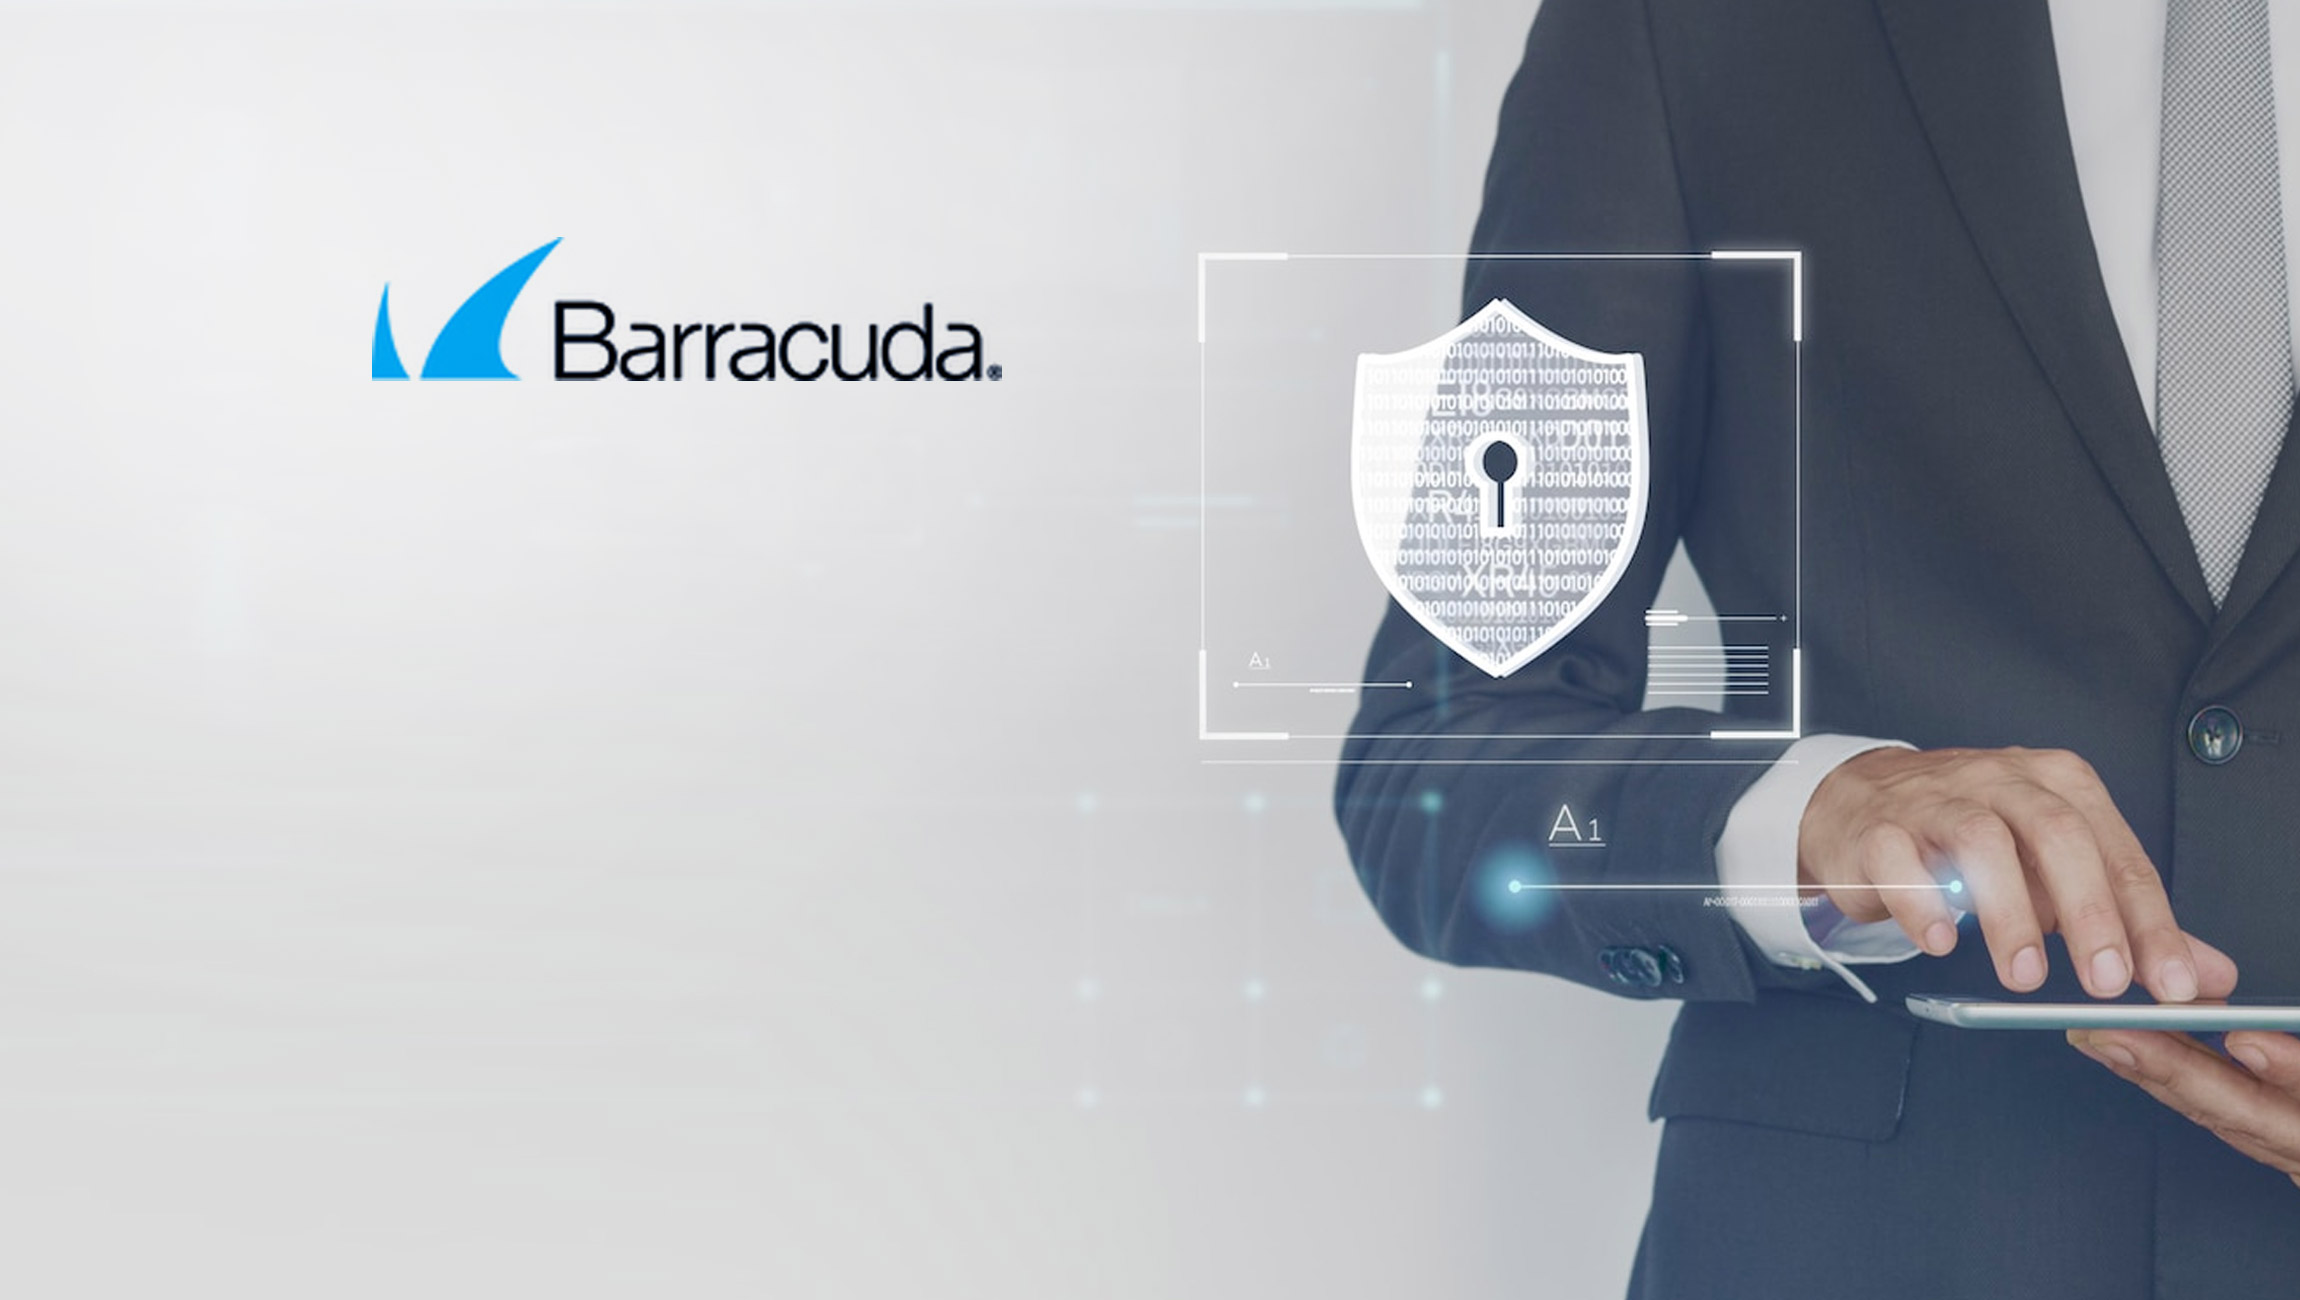 Barracuda Helps Customers Accelerate Their Digital Business Transformation With Cybersecurity and Data Protection Solutions